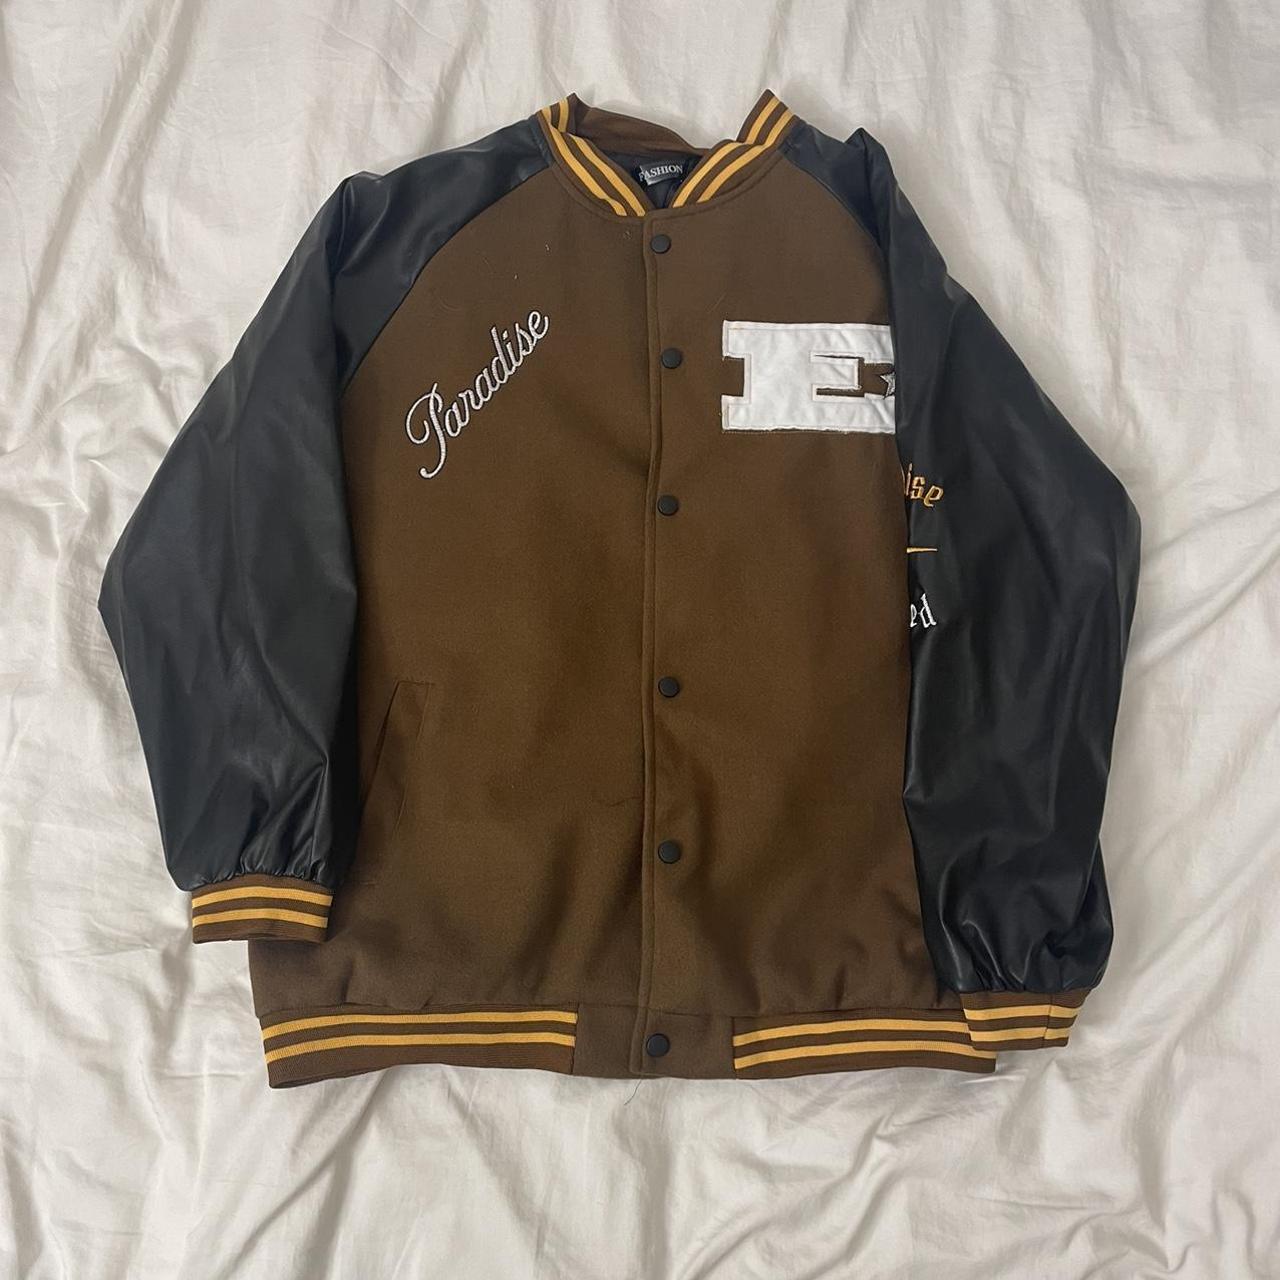 item listed by djgrails